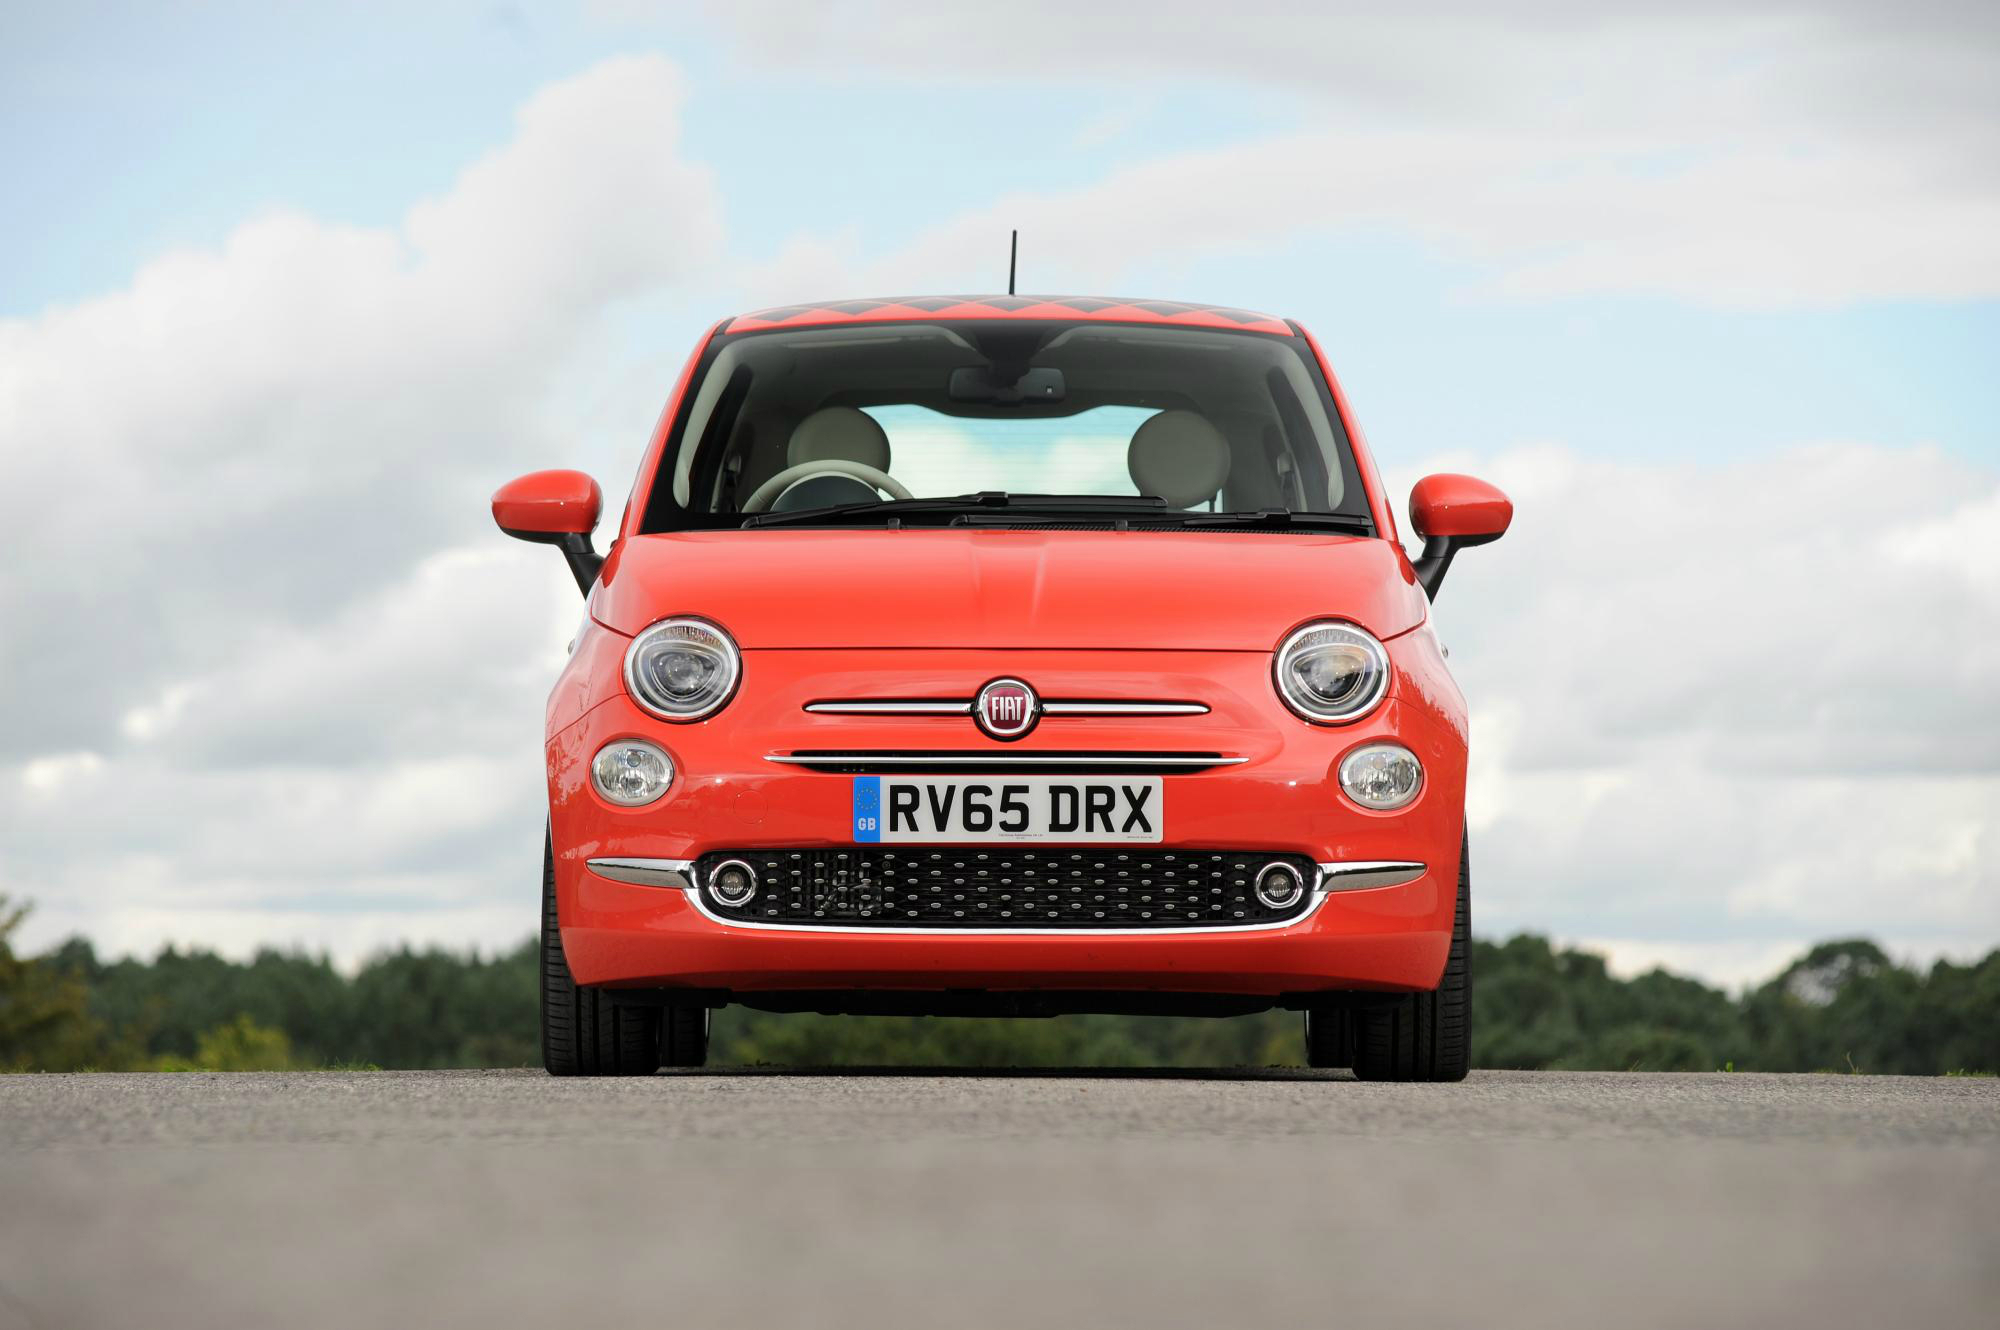 Fiat 500 Twin Air will cost more to tax in 2017